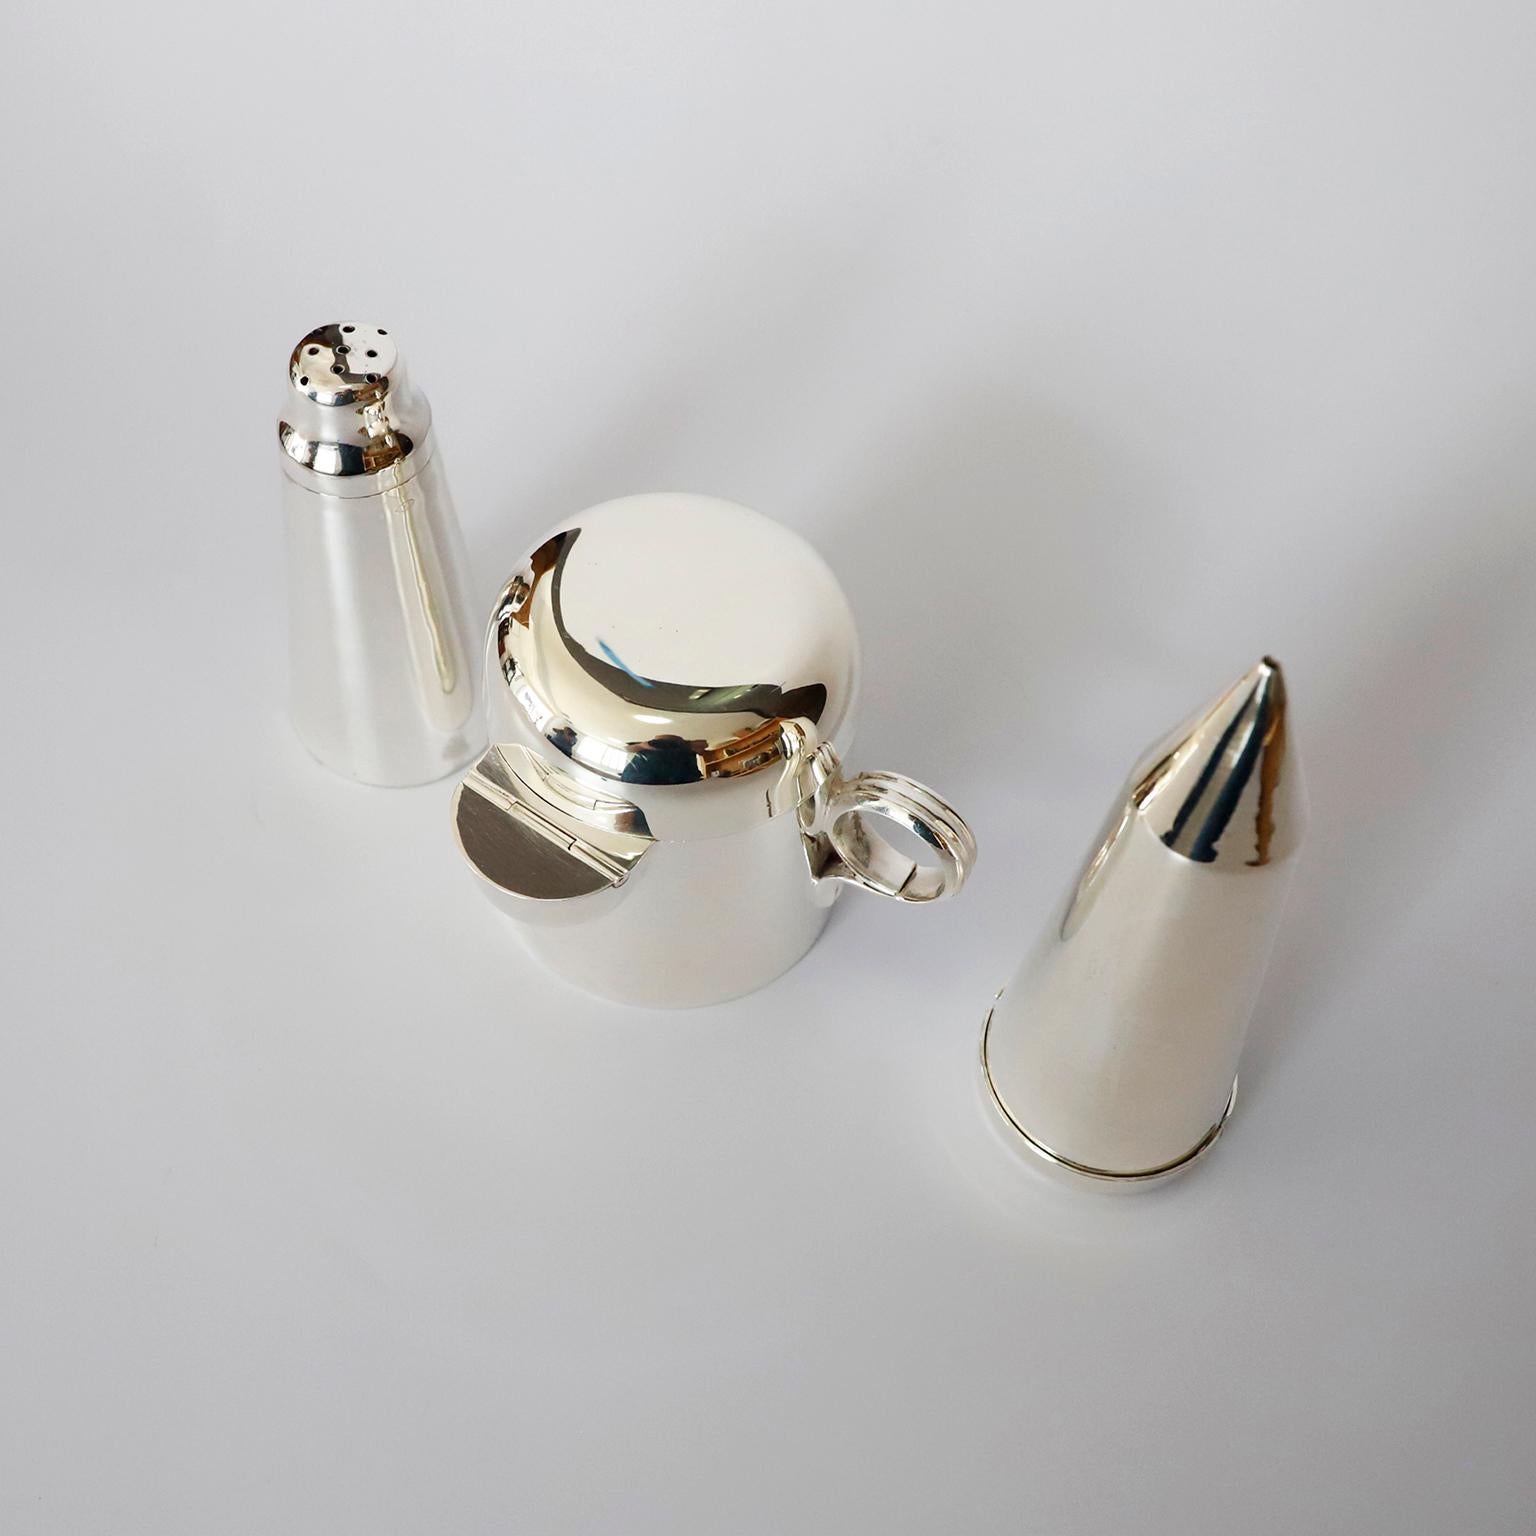 Circa 1940. We offer this Bauhaus, salt, pepper and sugar set, made in Germany. Each piece includes marks 